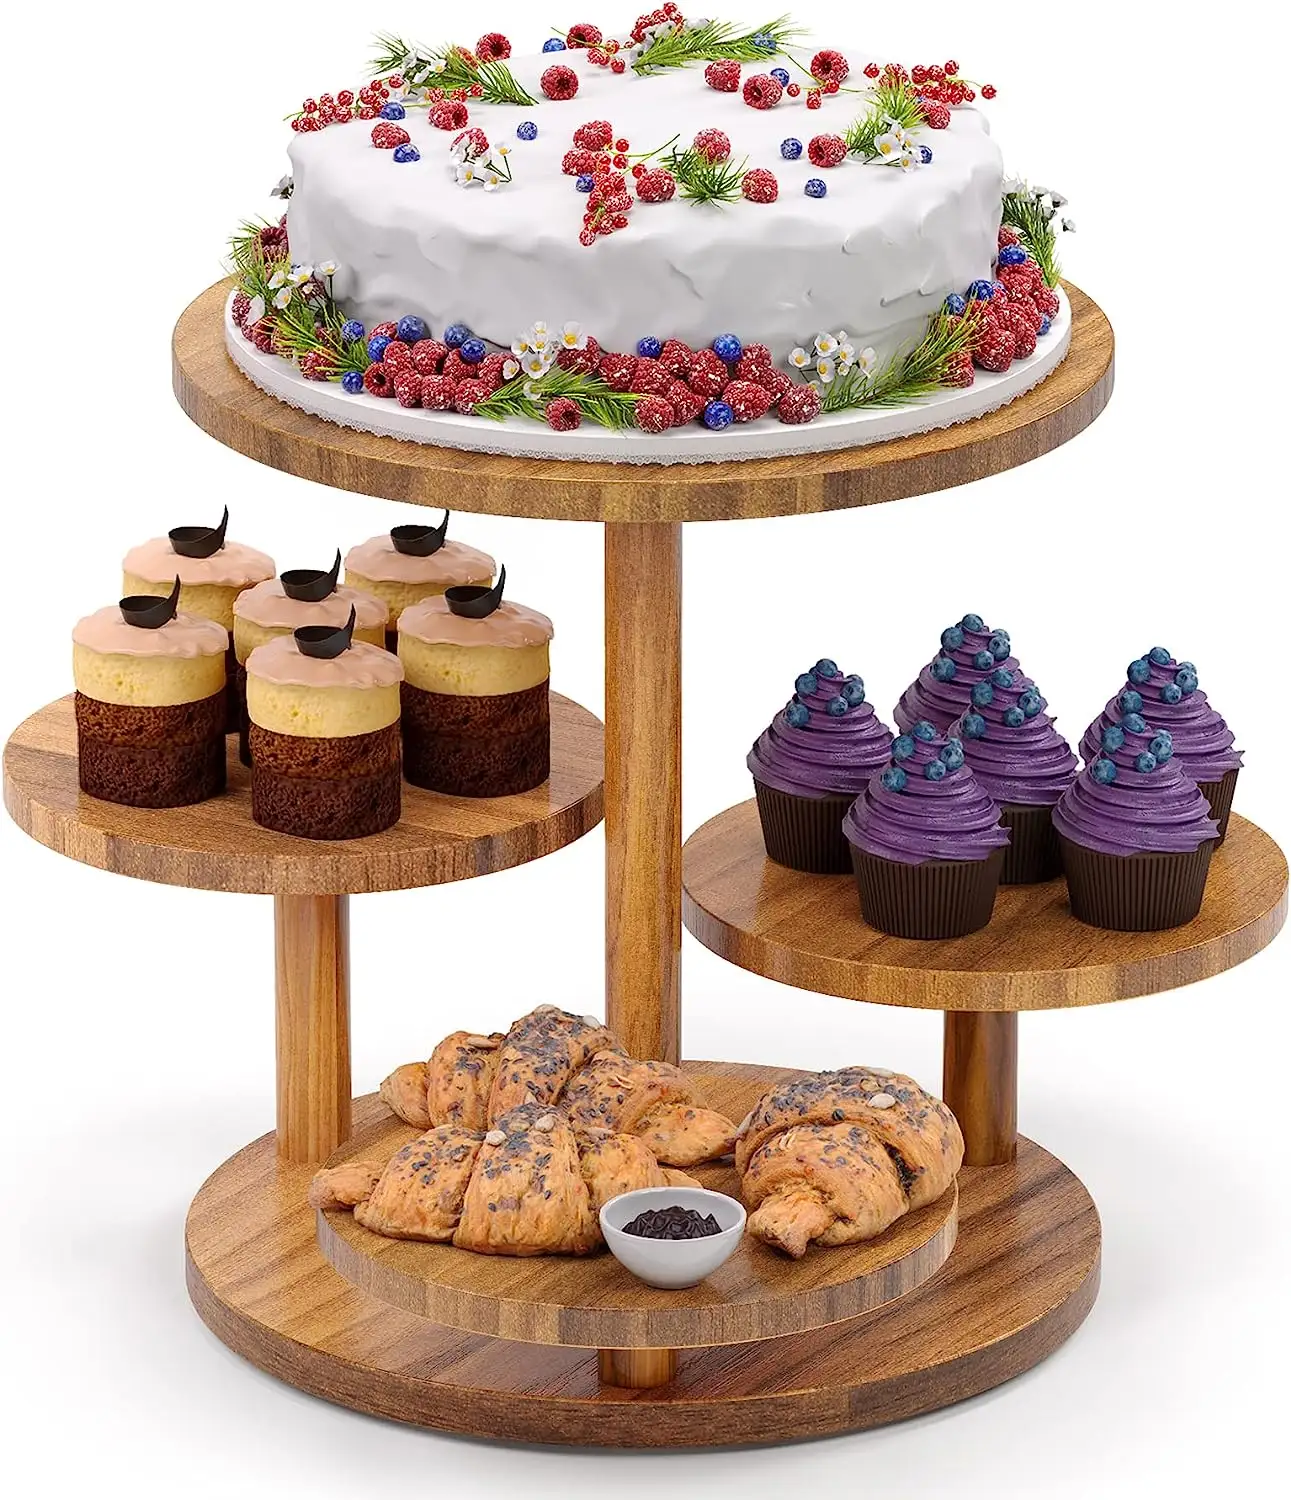 4 Tier Round Cupcake Tower Stand,Wood Cake Stand with Tiered Tray Decor